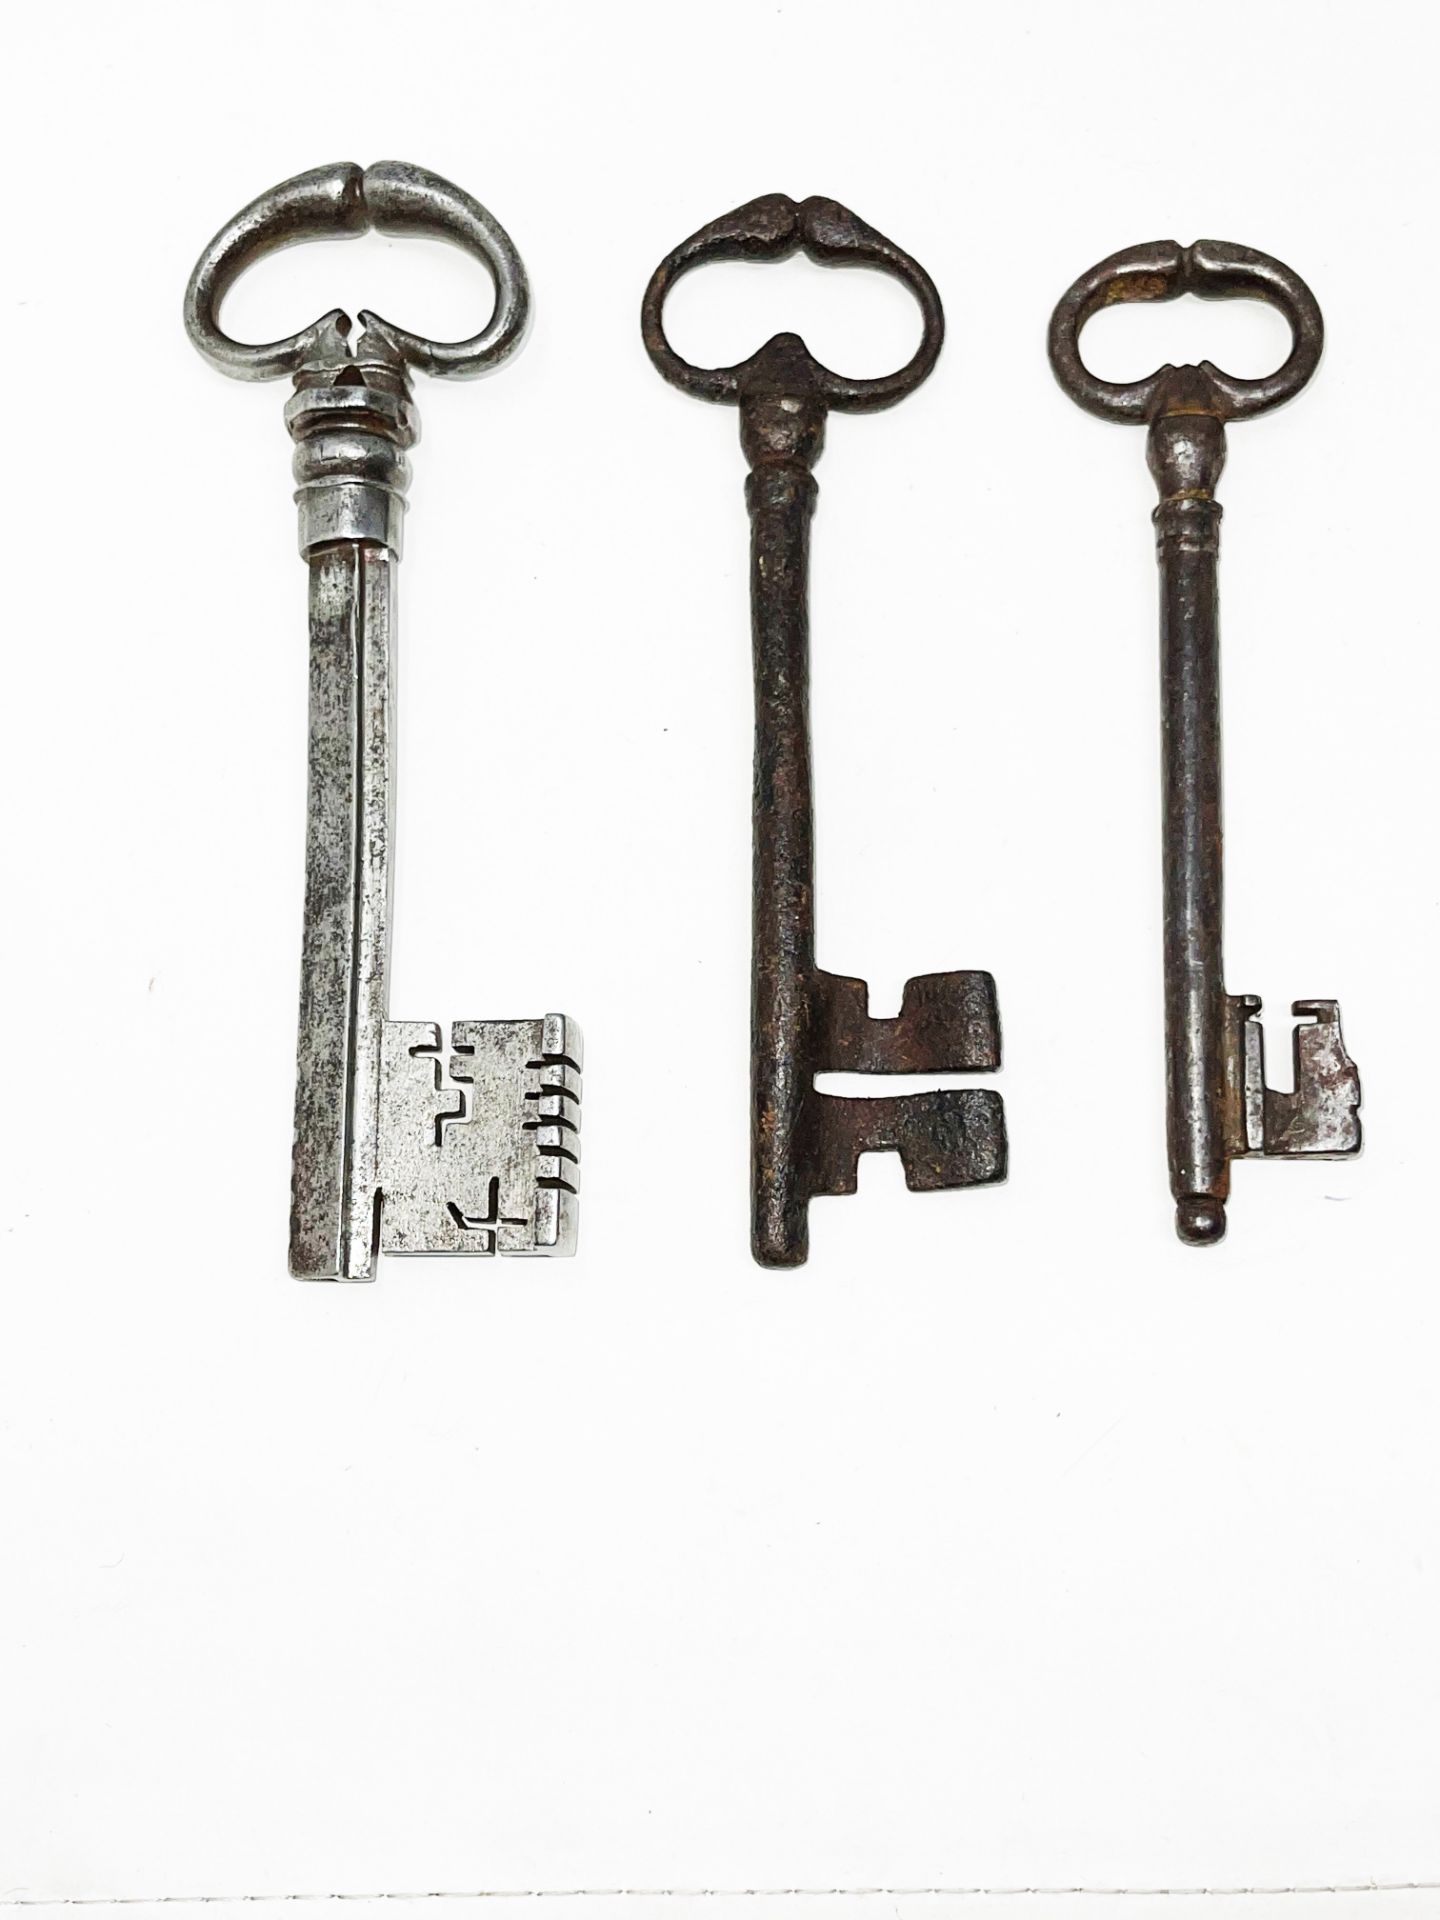 Three frog-leg ring keys 13, 56 - 14, 41 - 14, 8 cmPart of the chapter "From Enlightenment to